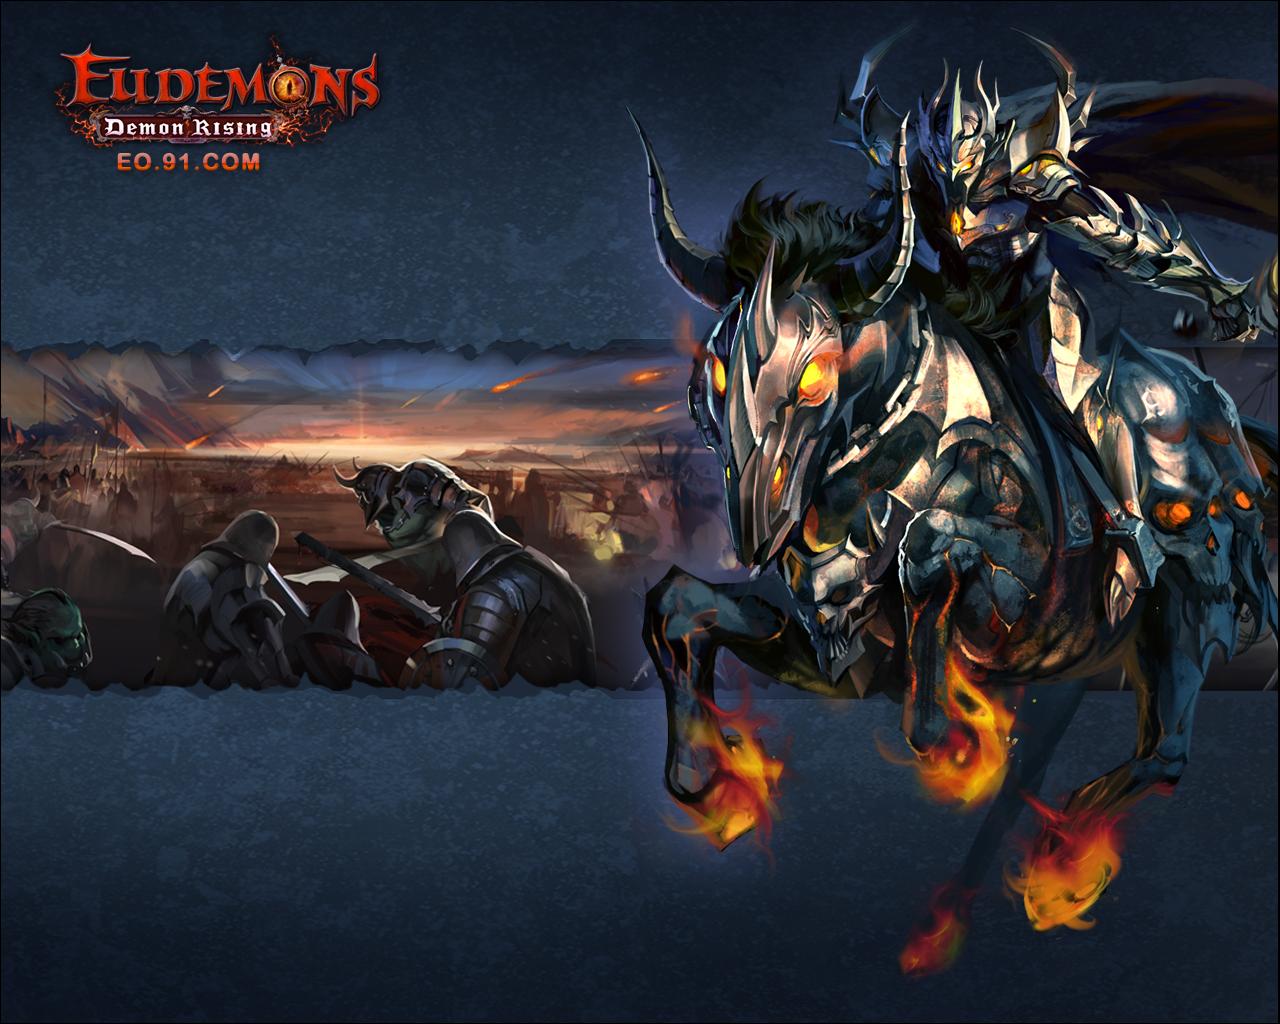 Video Game Eudemons Online 1280x1024